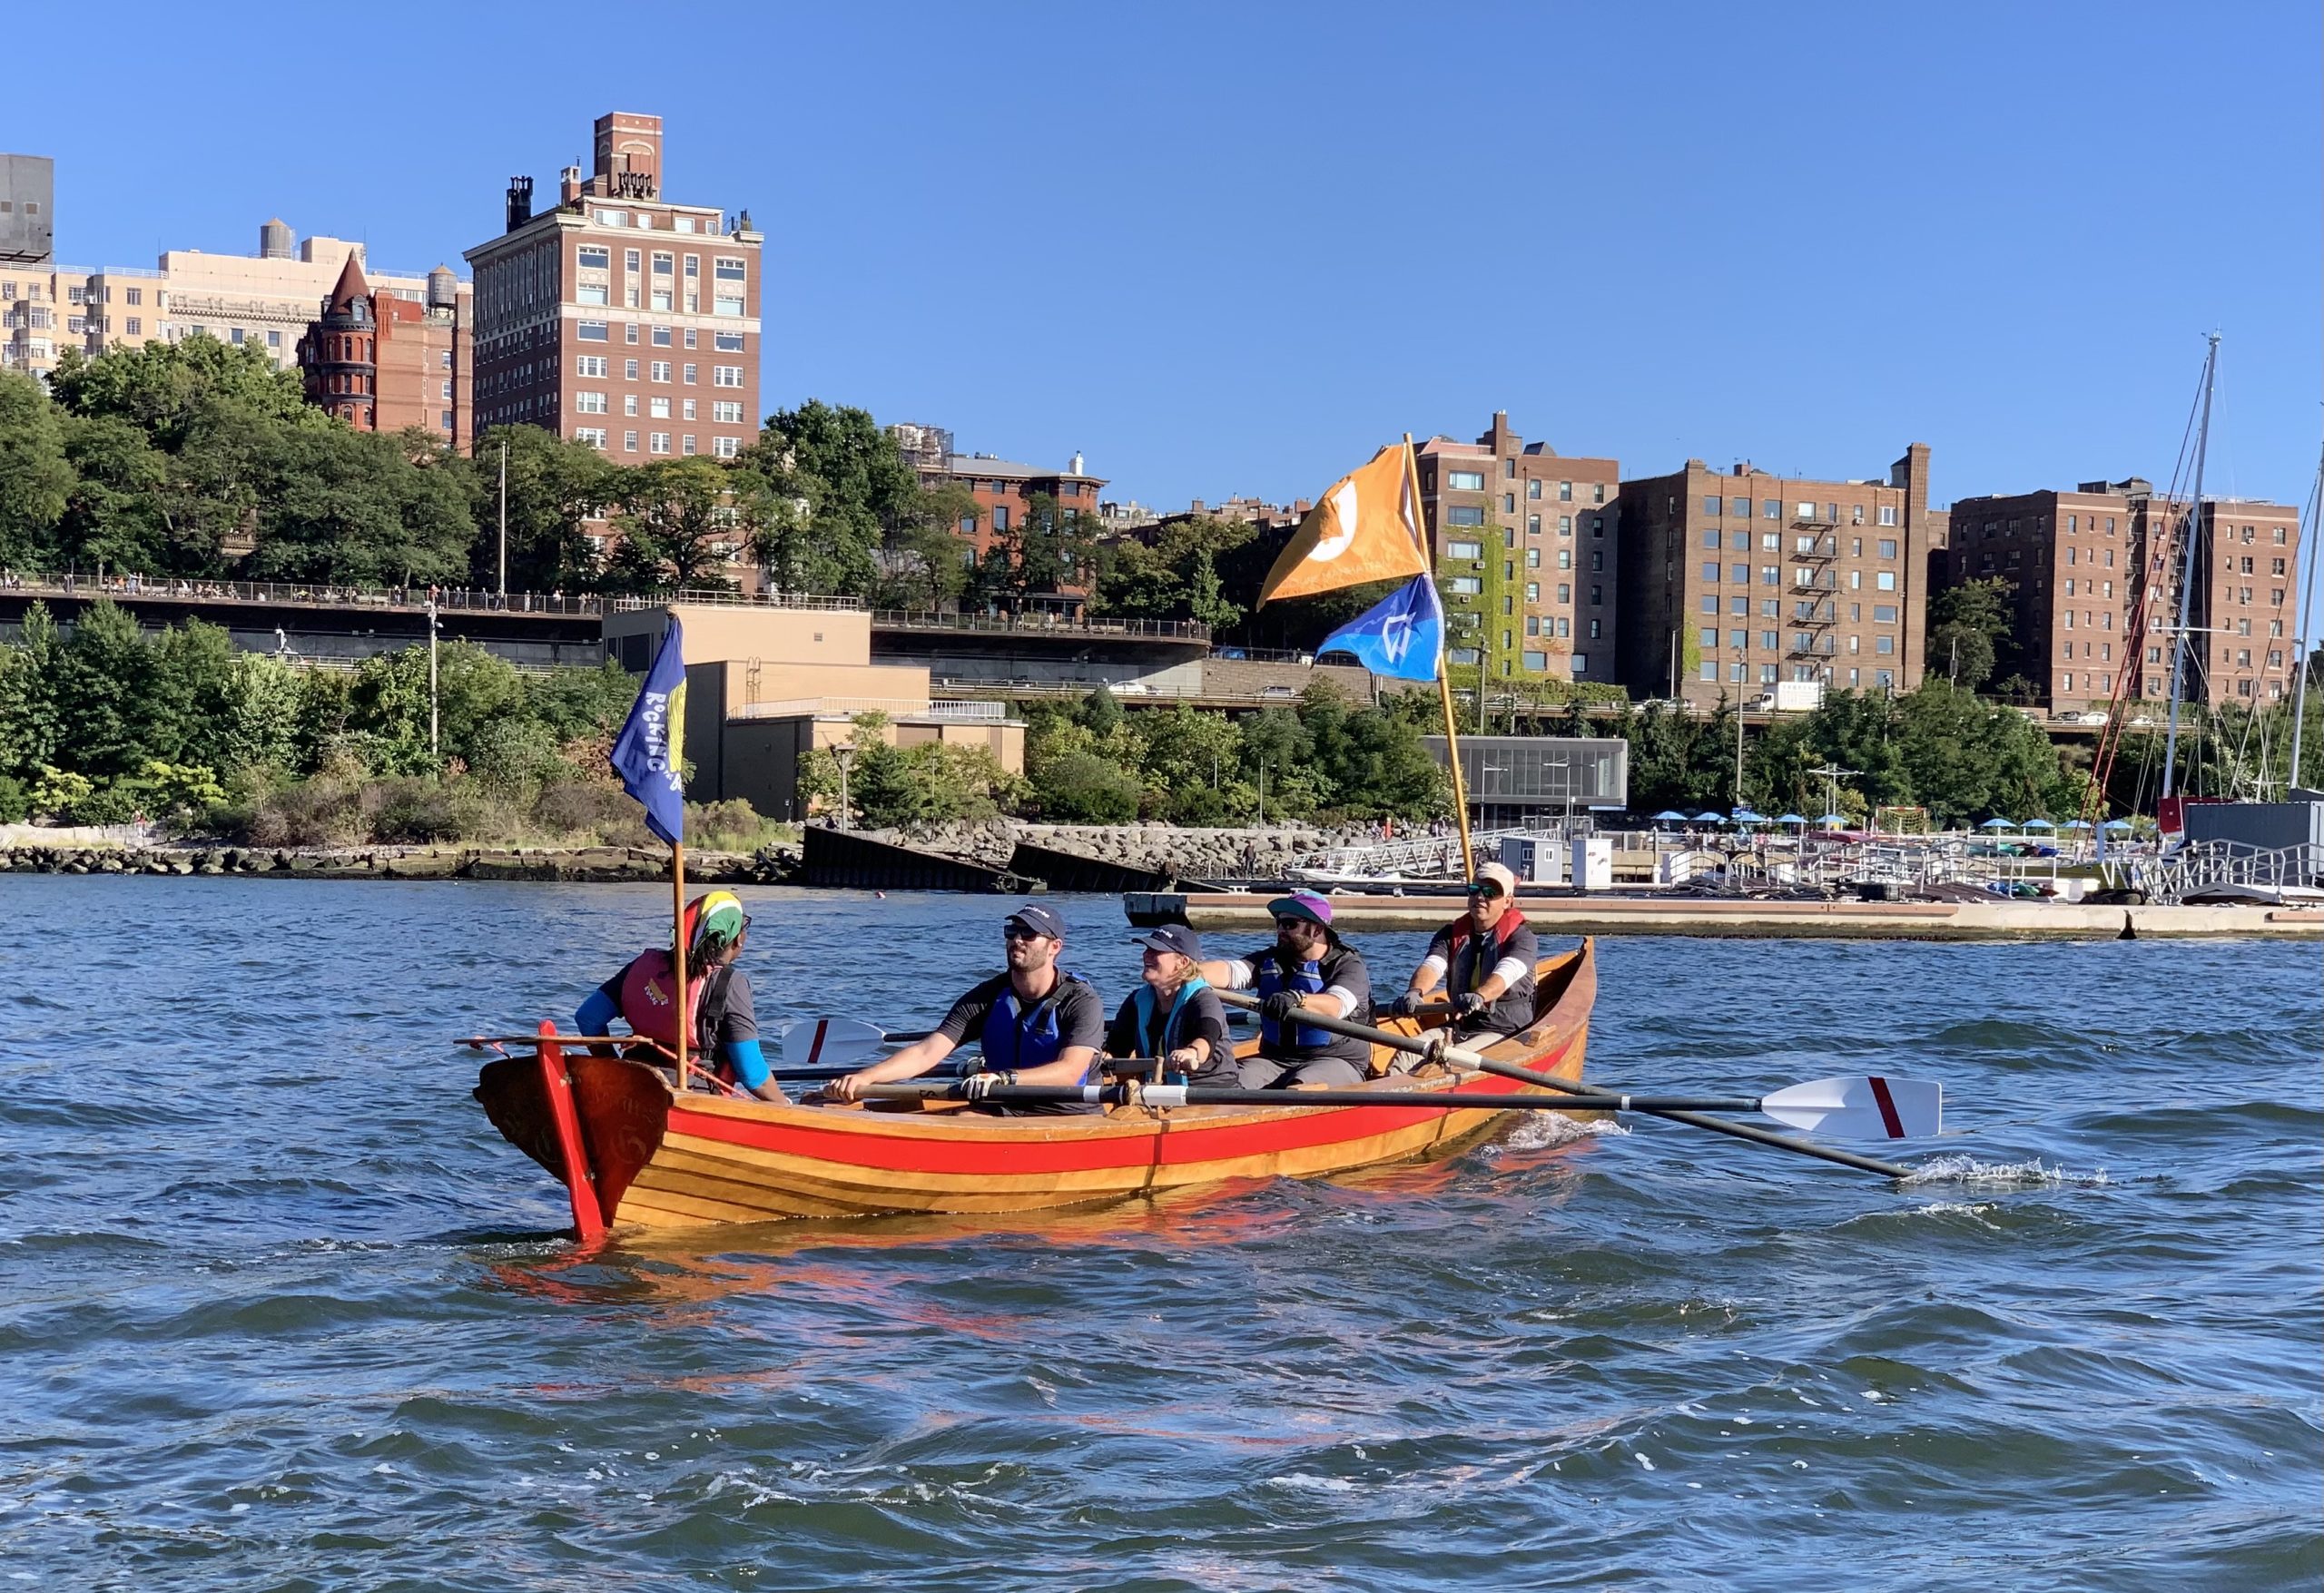 One of the rowing teams takes off on their journey, with Brooklyn Heights in the background.
Photo: Mary Frost, Brooklyn Eagle
